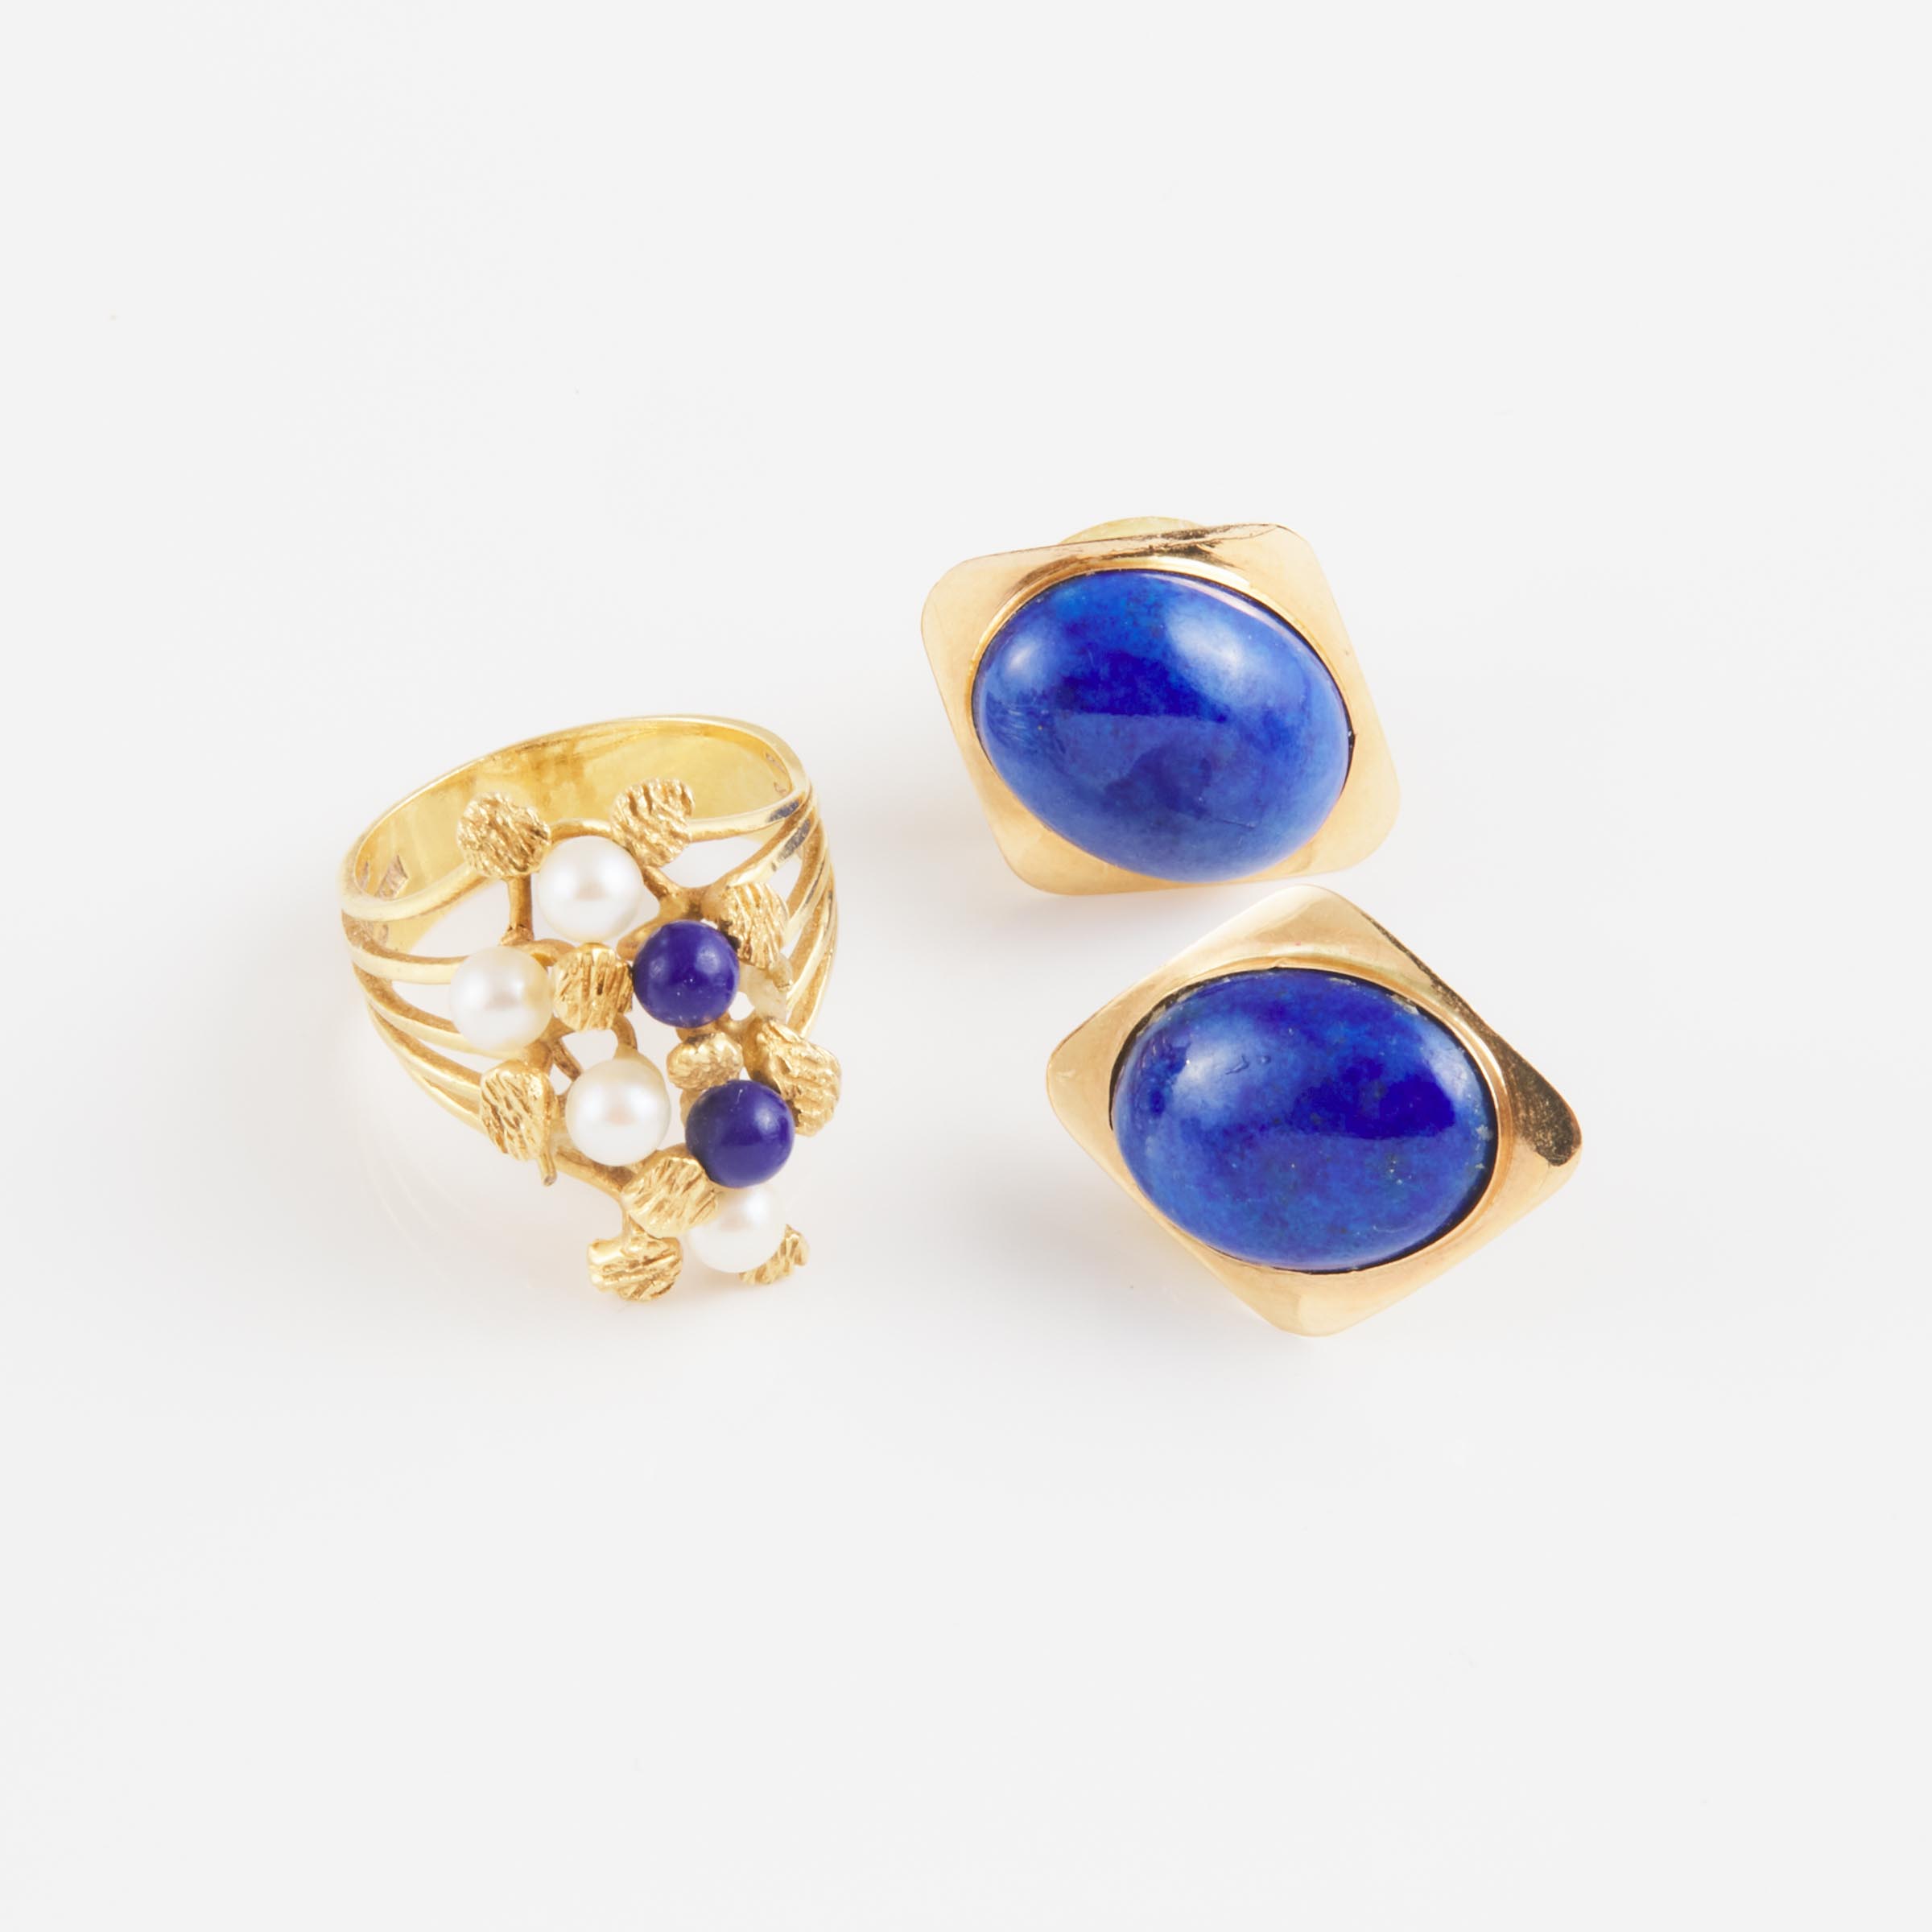 A Pair Of 14k Yellow Gold Earrings And An 18k Yellow Gold Ring